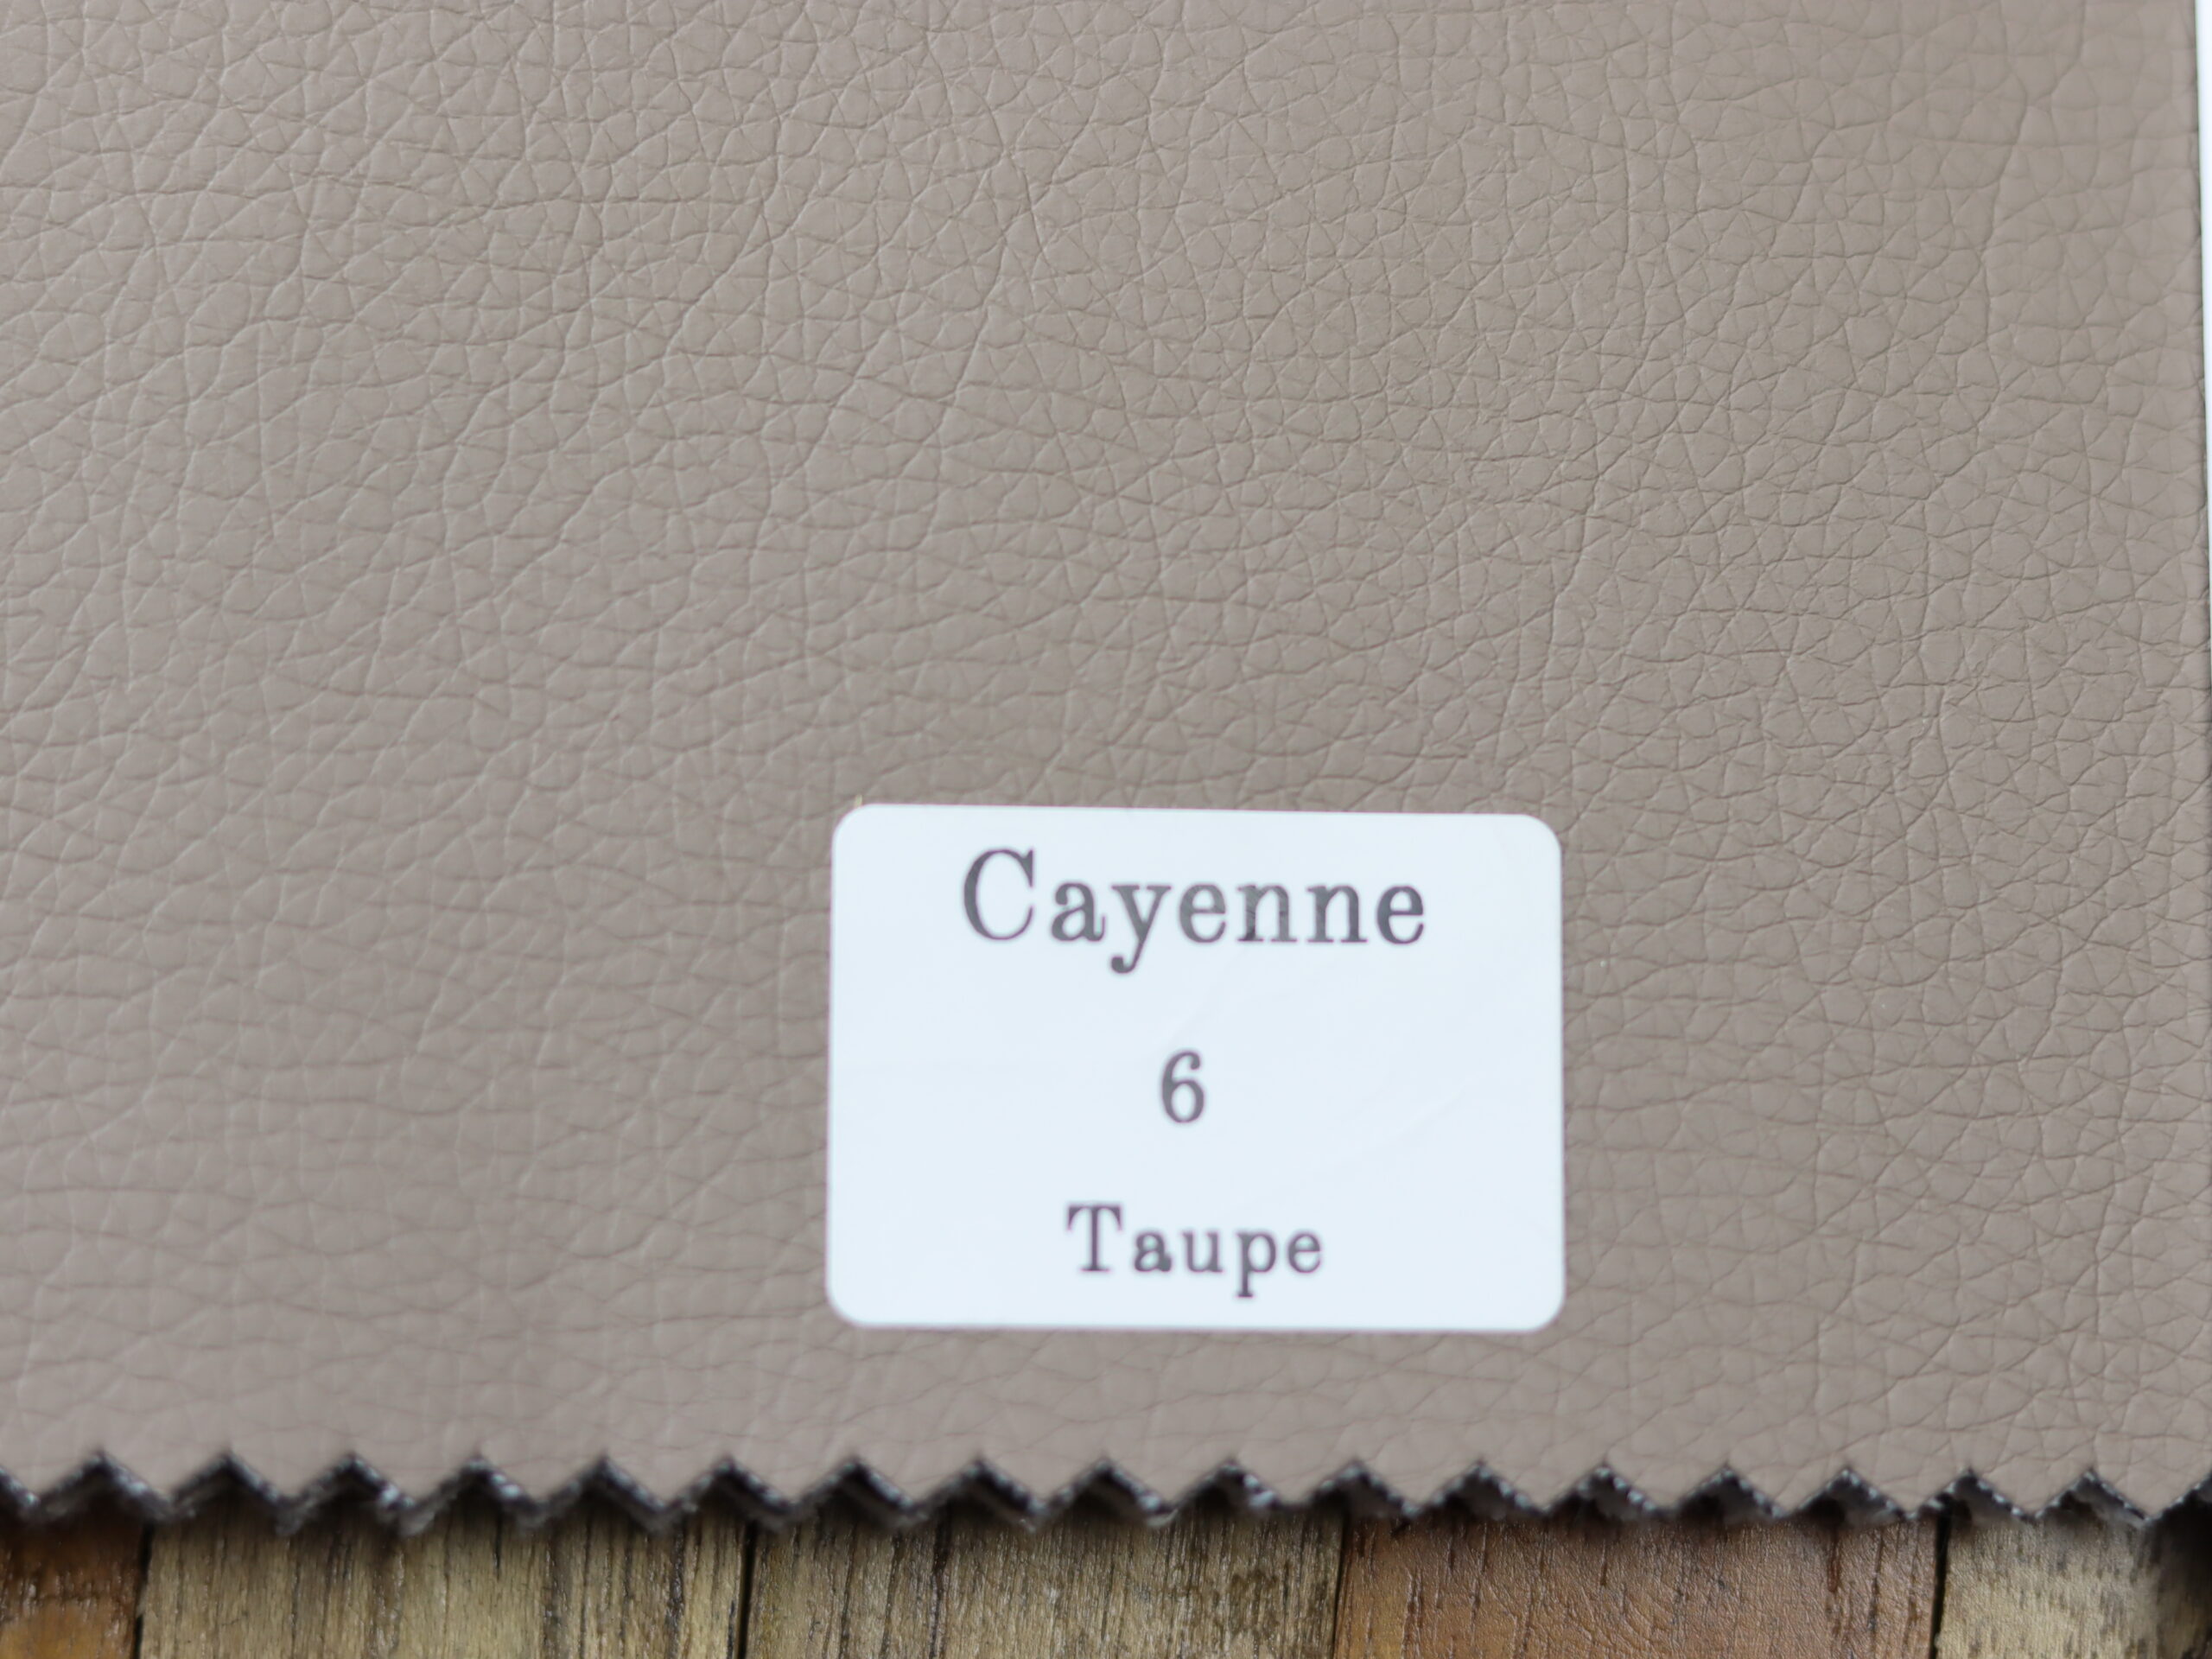 Cayanne 6 Taupe